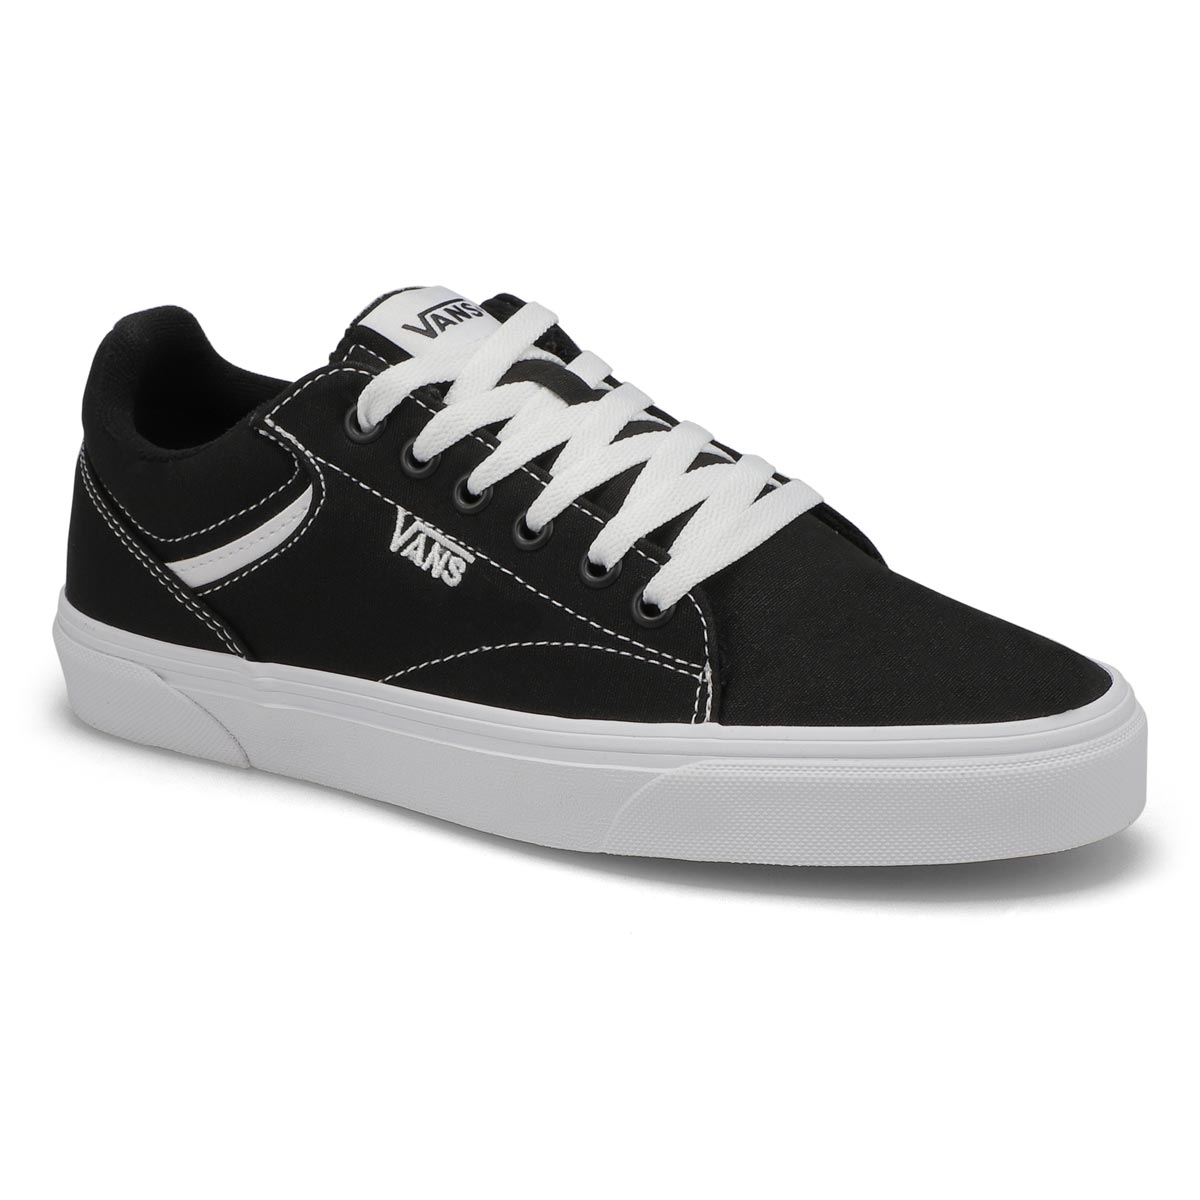 black and white lace up vans